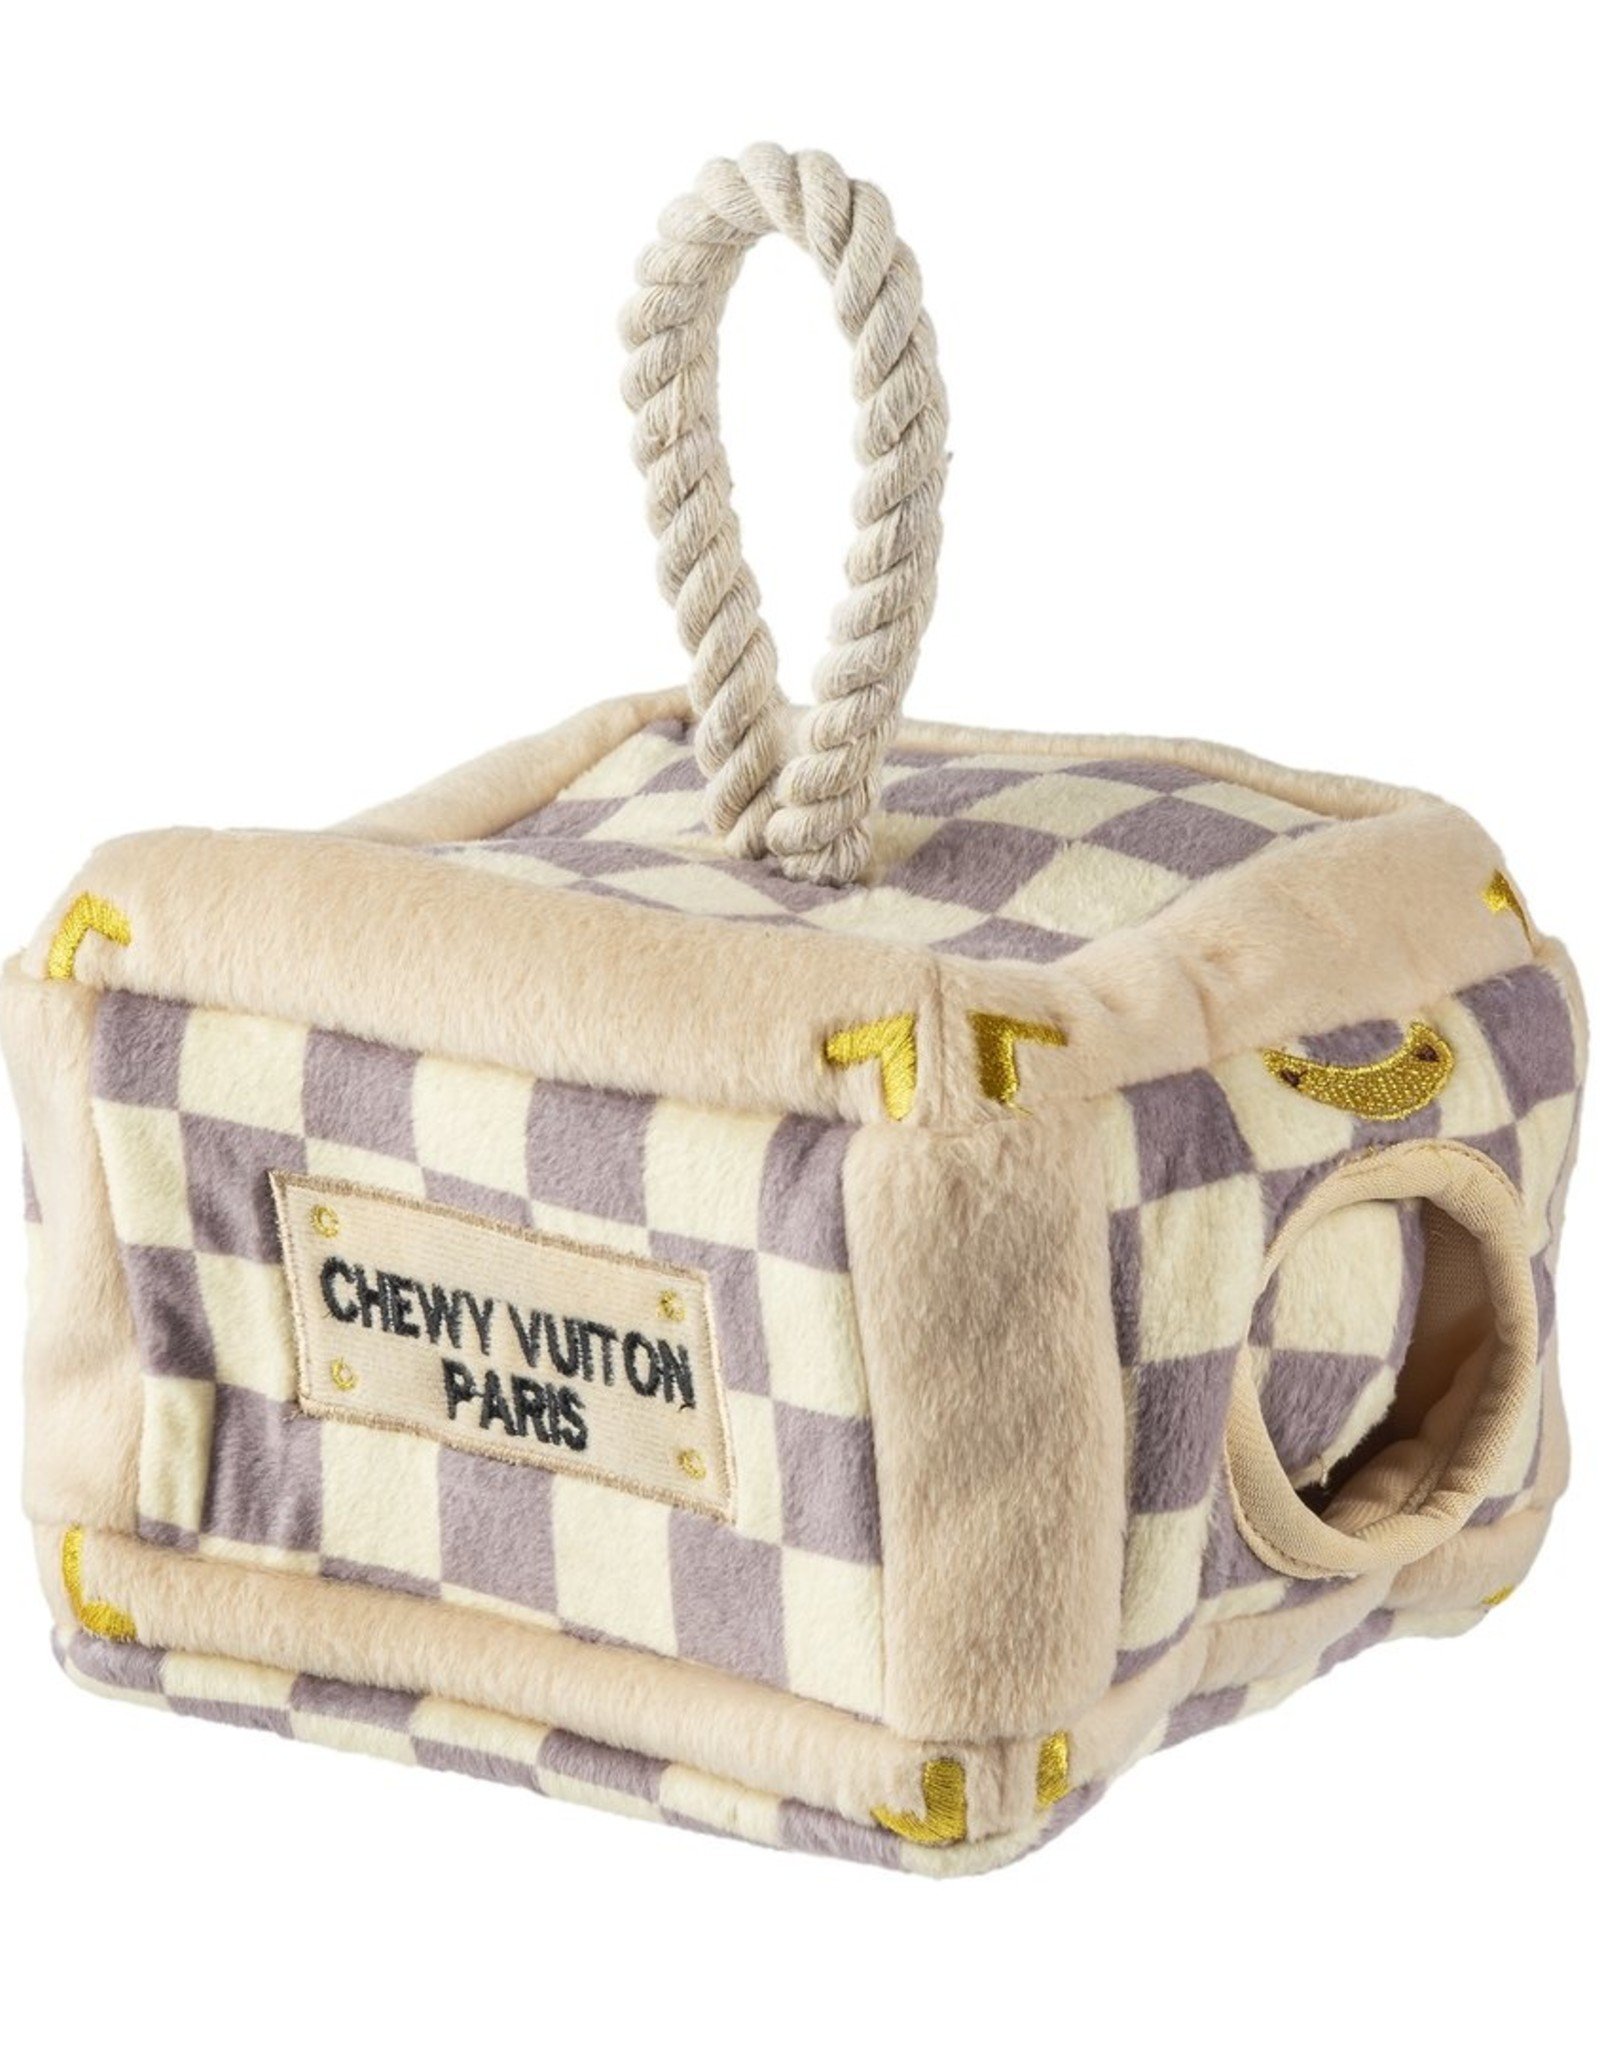 Haute Diggity Dog Interactive - Checkered Chewy Vuitton